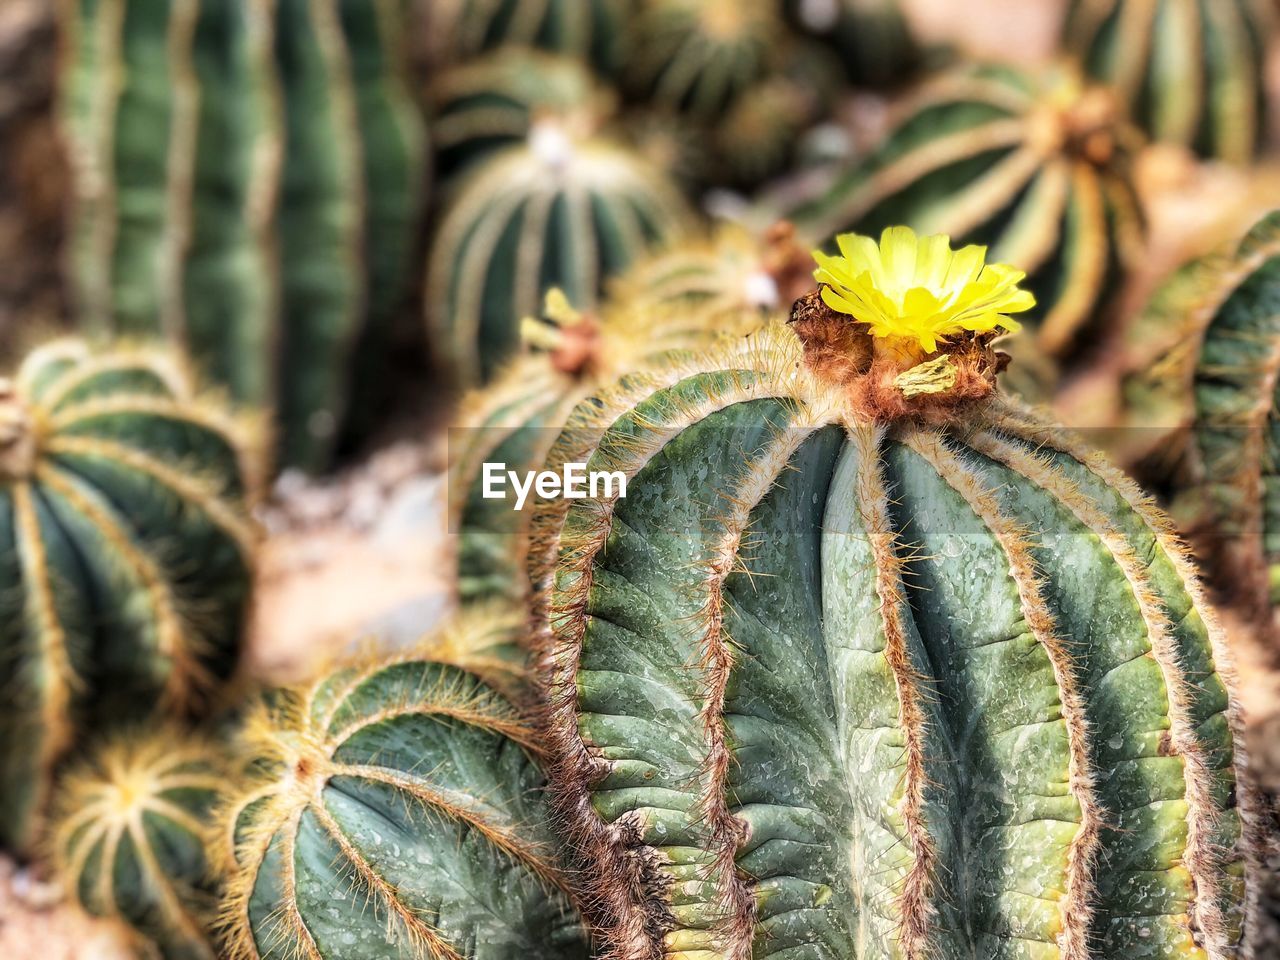 CLOSE-UP OF YELLOW CACTUS PLANT